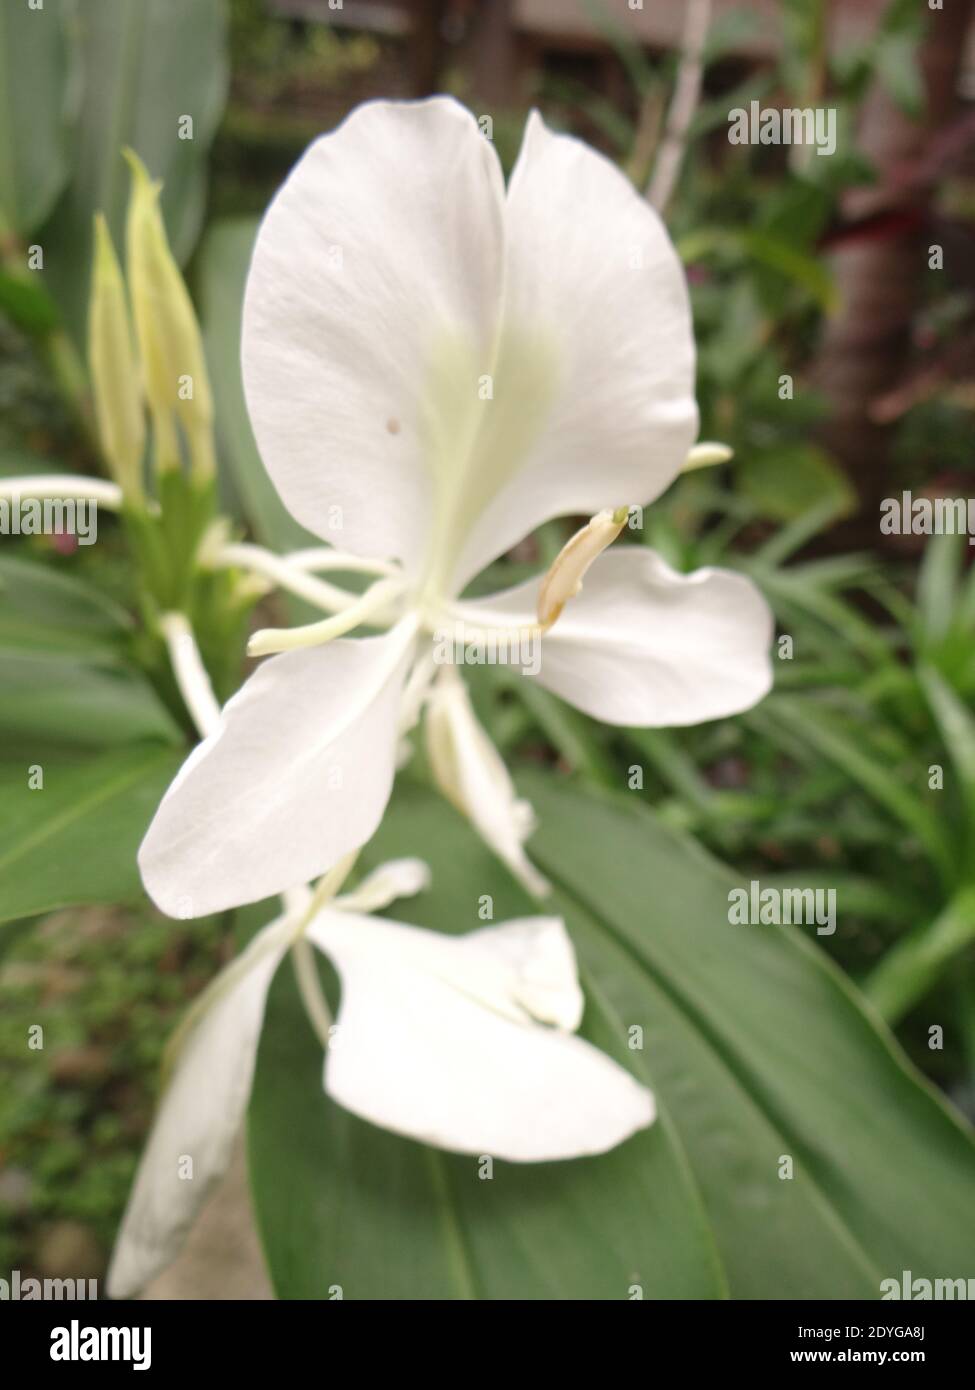 A vertical shot of white mariposa lily flowers growing in the garden Stock Photo